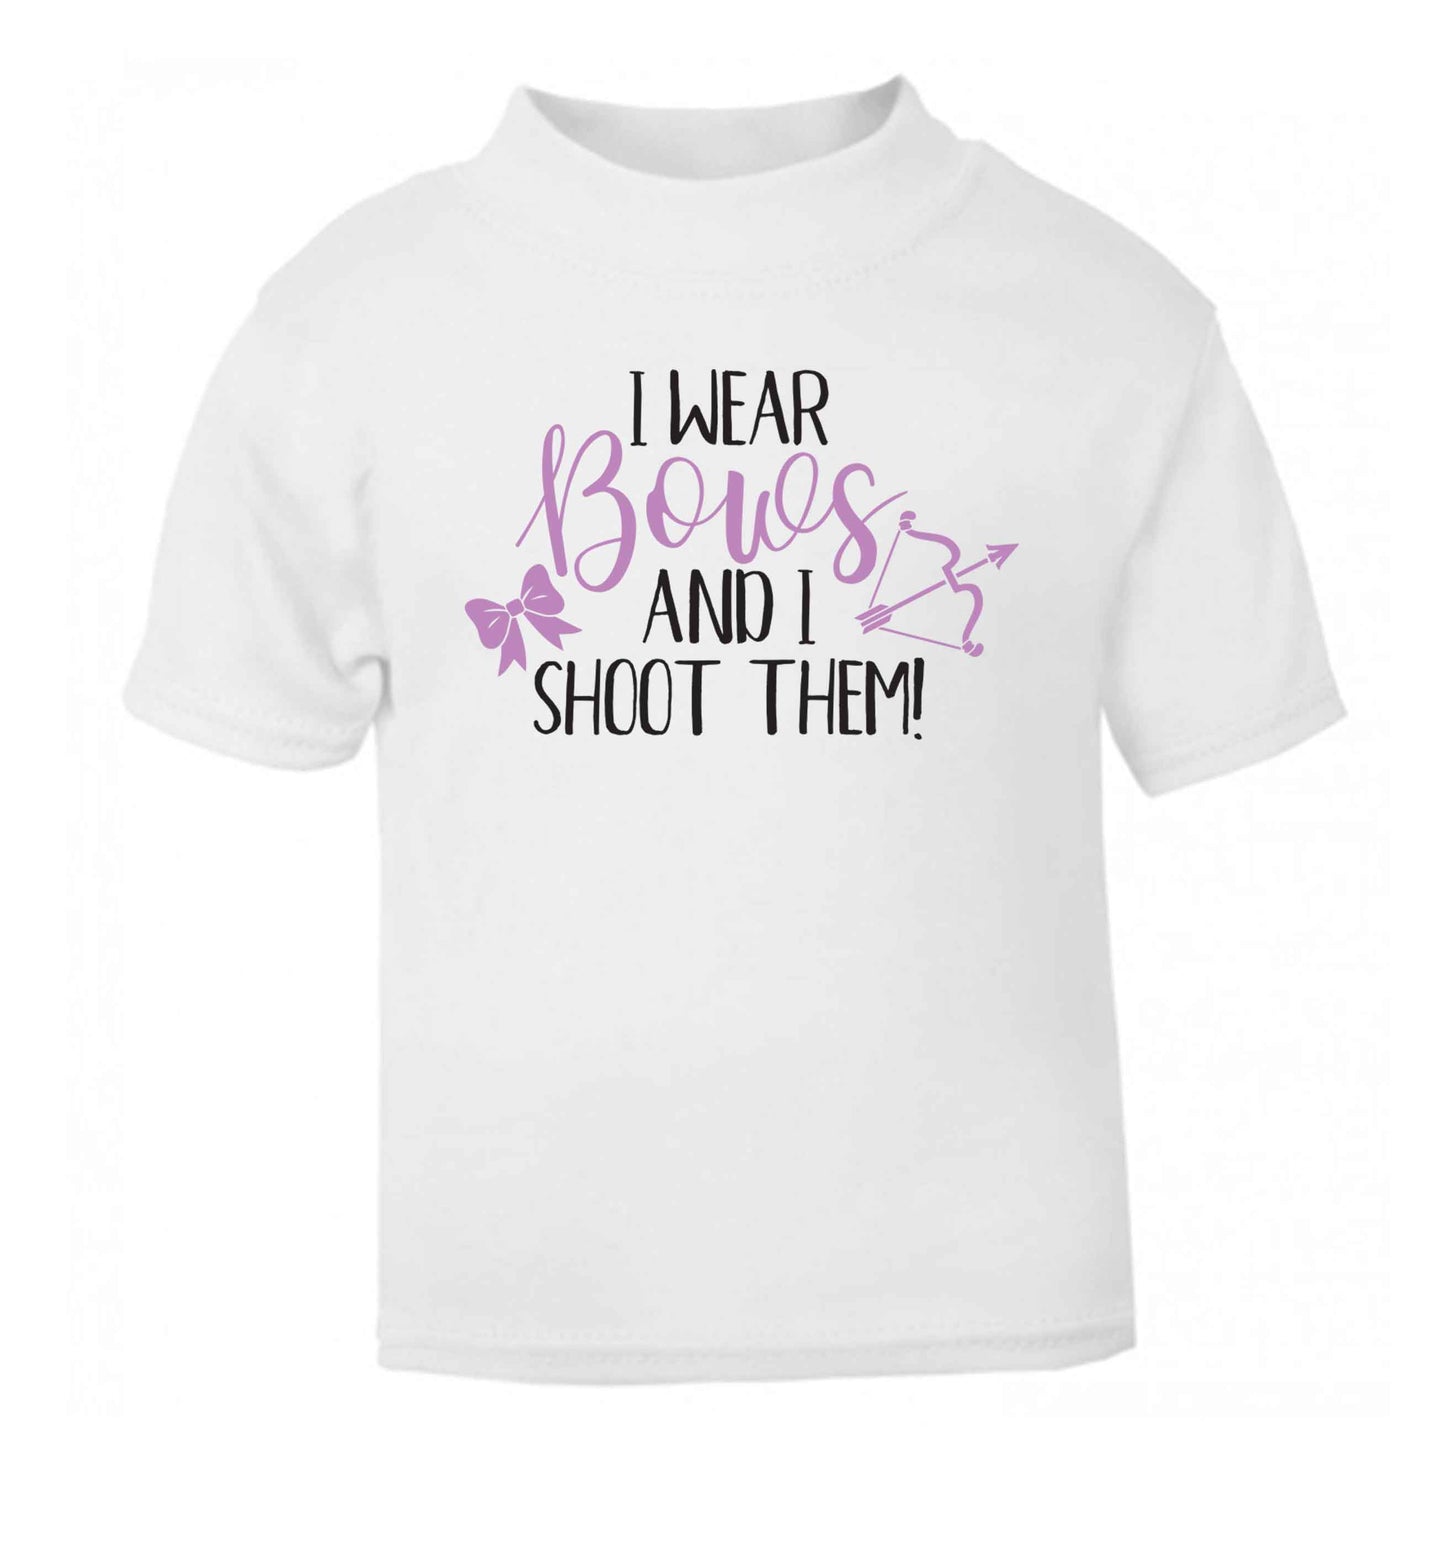 I wear bows and I shoot them white Baby Toddler Tshirt 2 Years